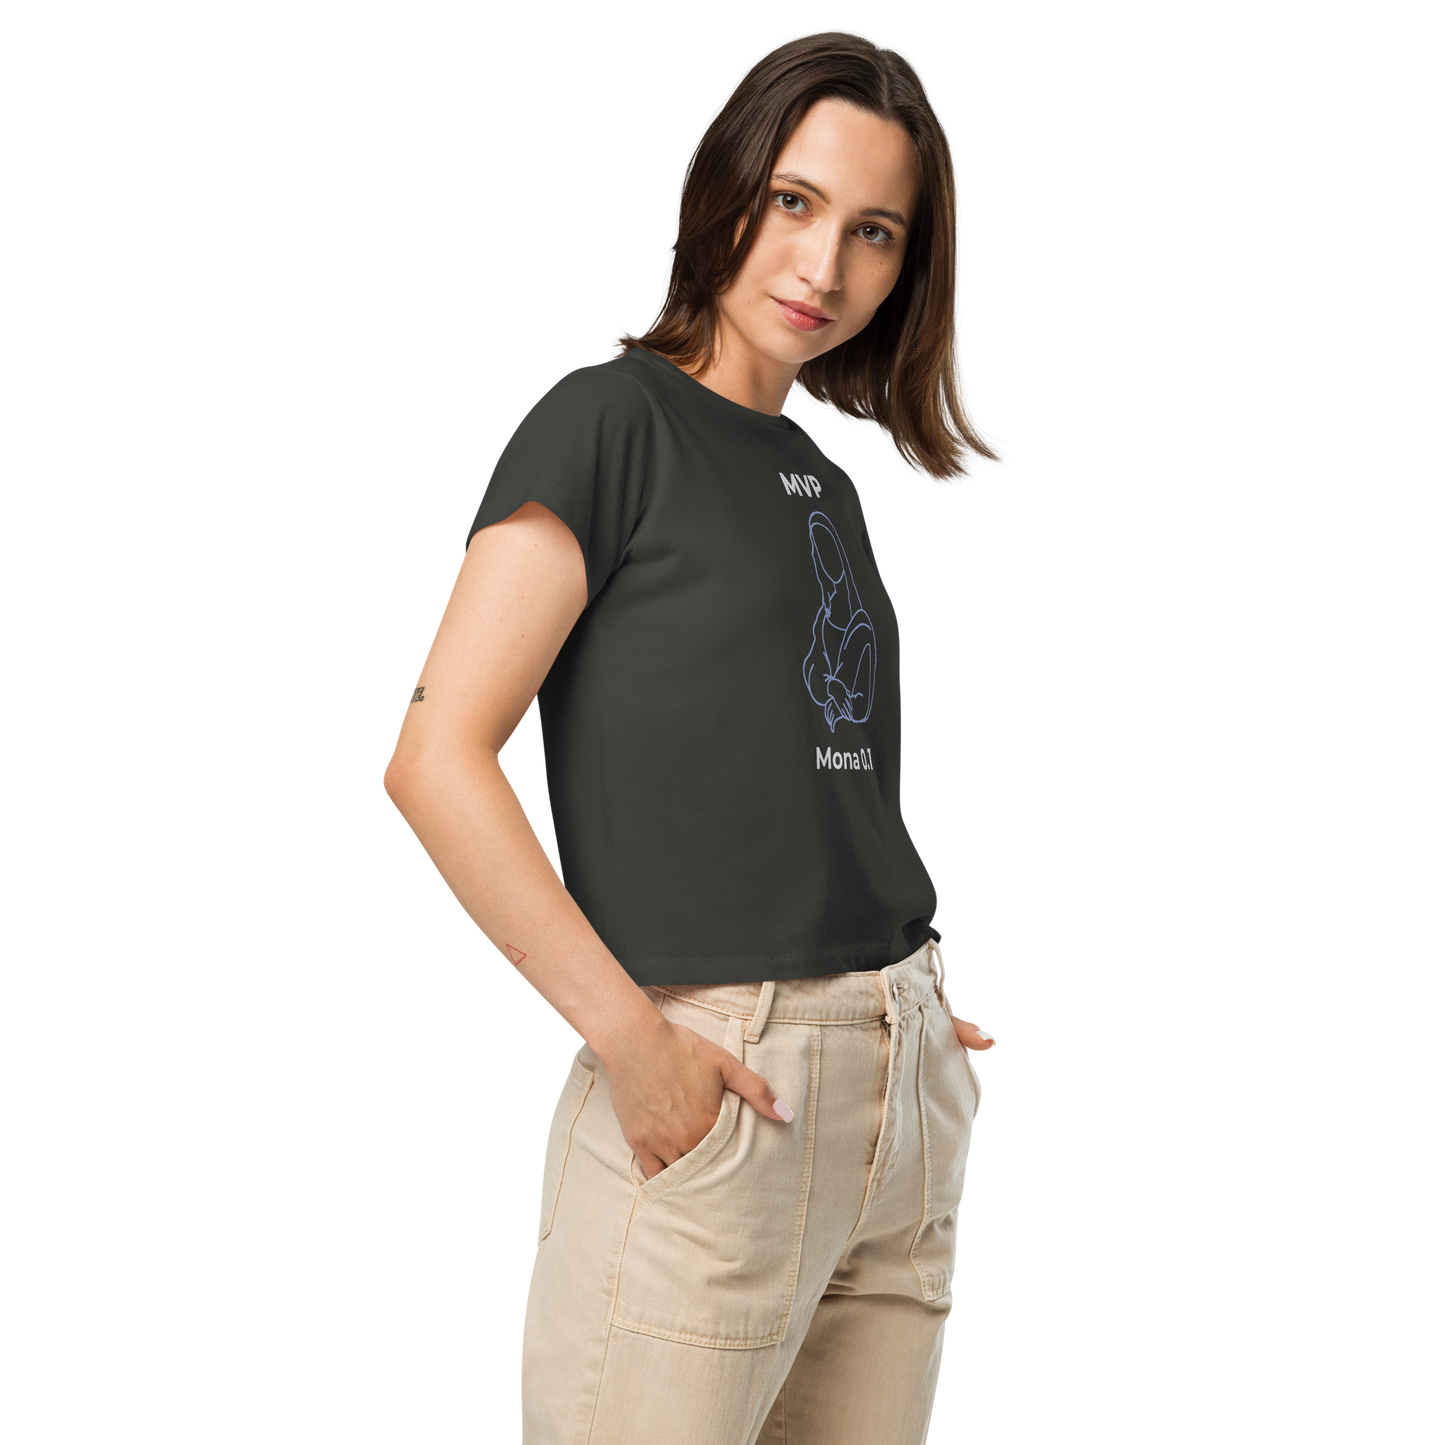 Women’s high-waisted t-shirt (click for colors)